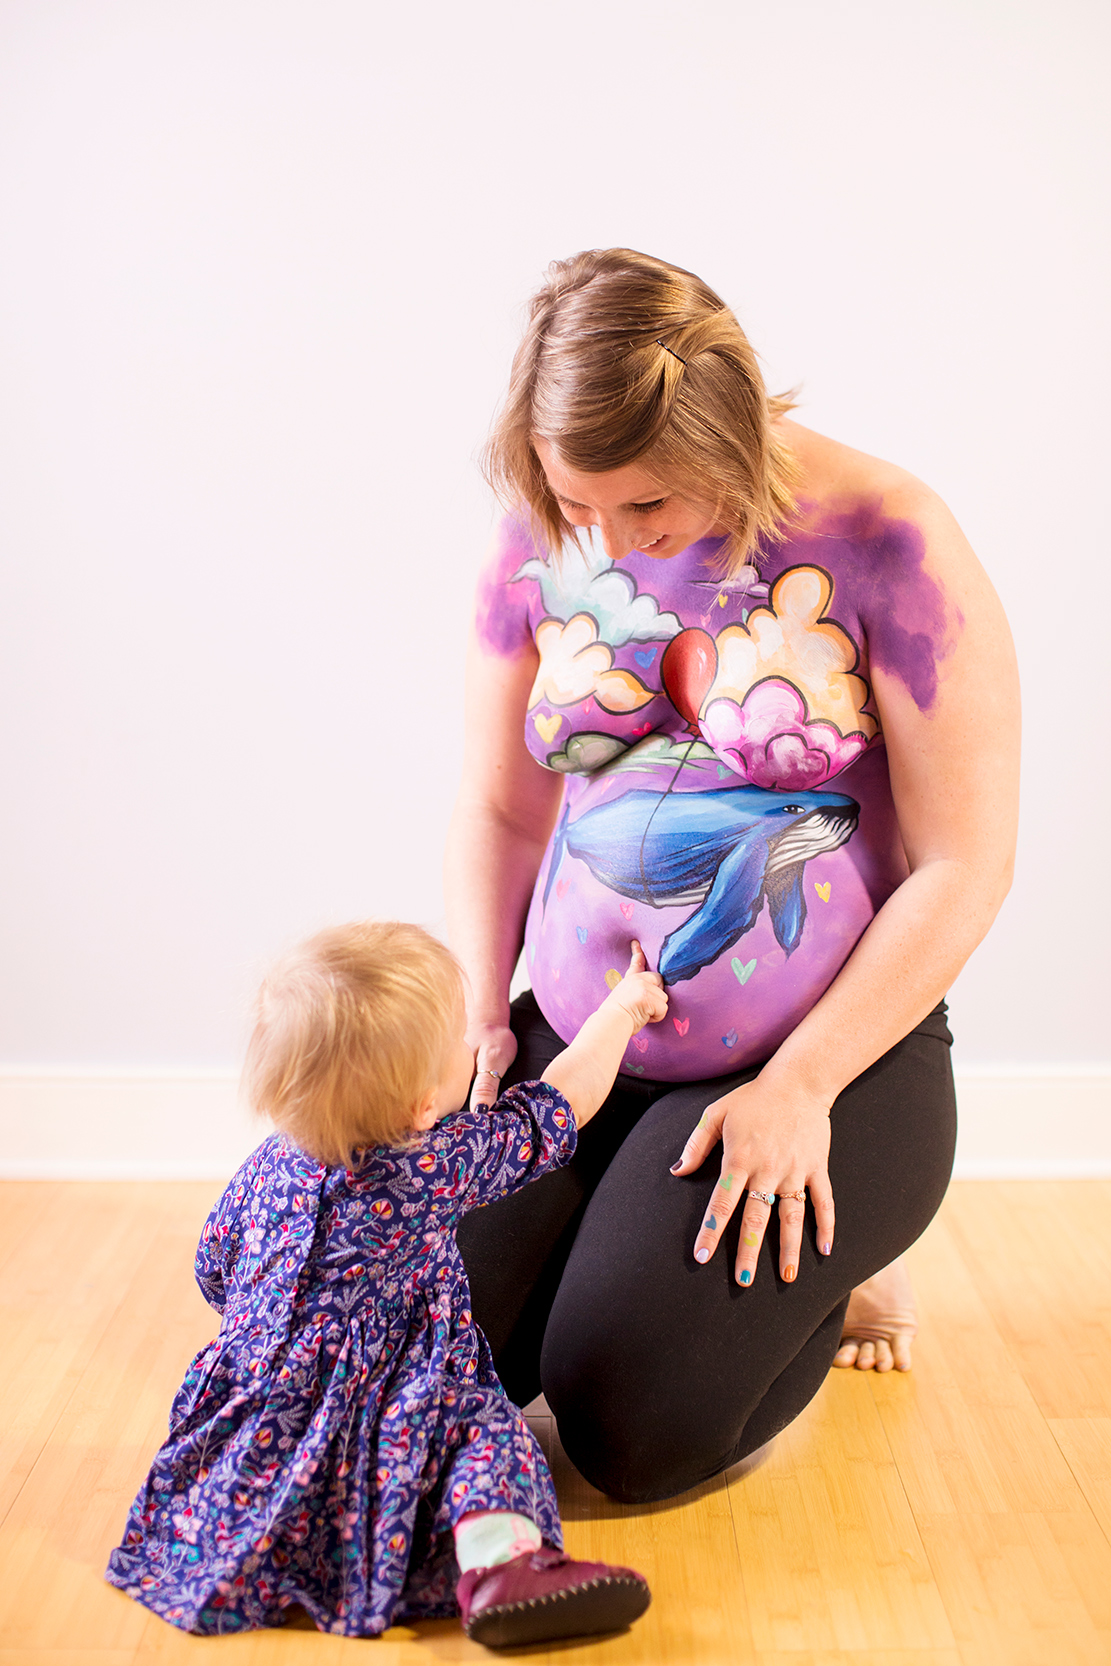 Body Painted Pregnant Belly Maternity Photo Shoot - Image Property of www.j-dphoto.com